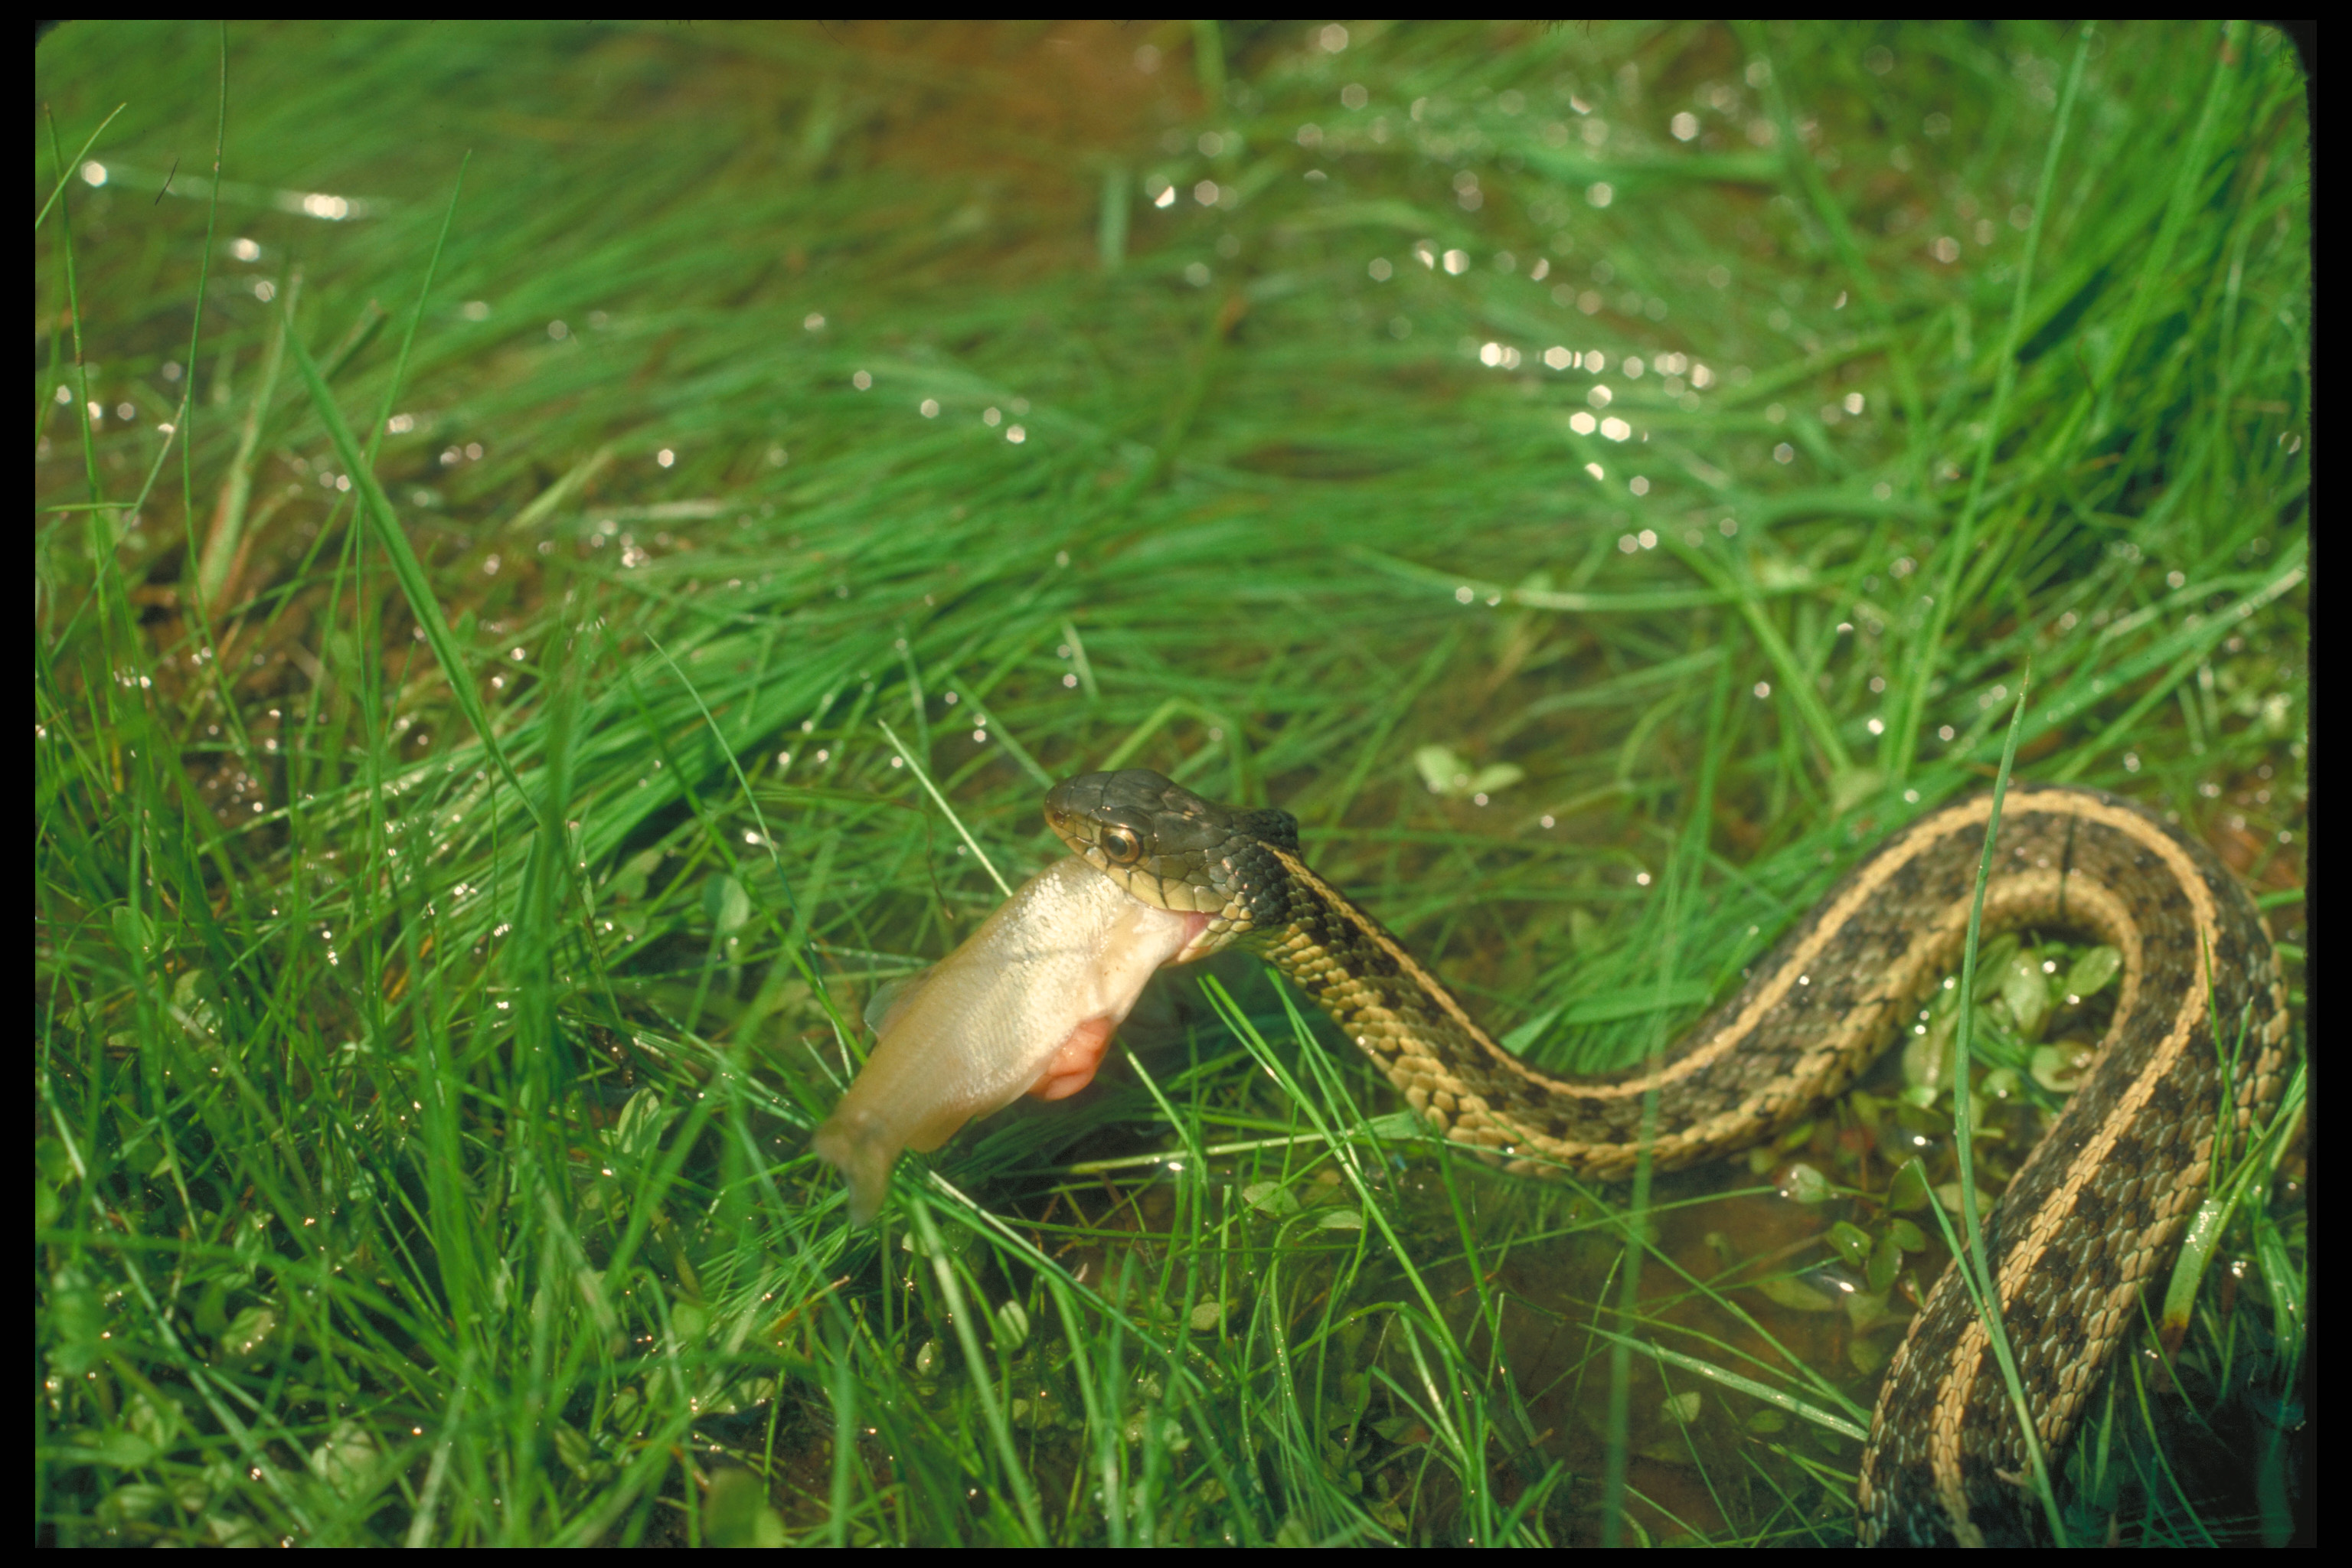 About Garter Snakes